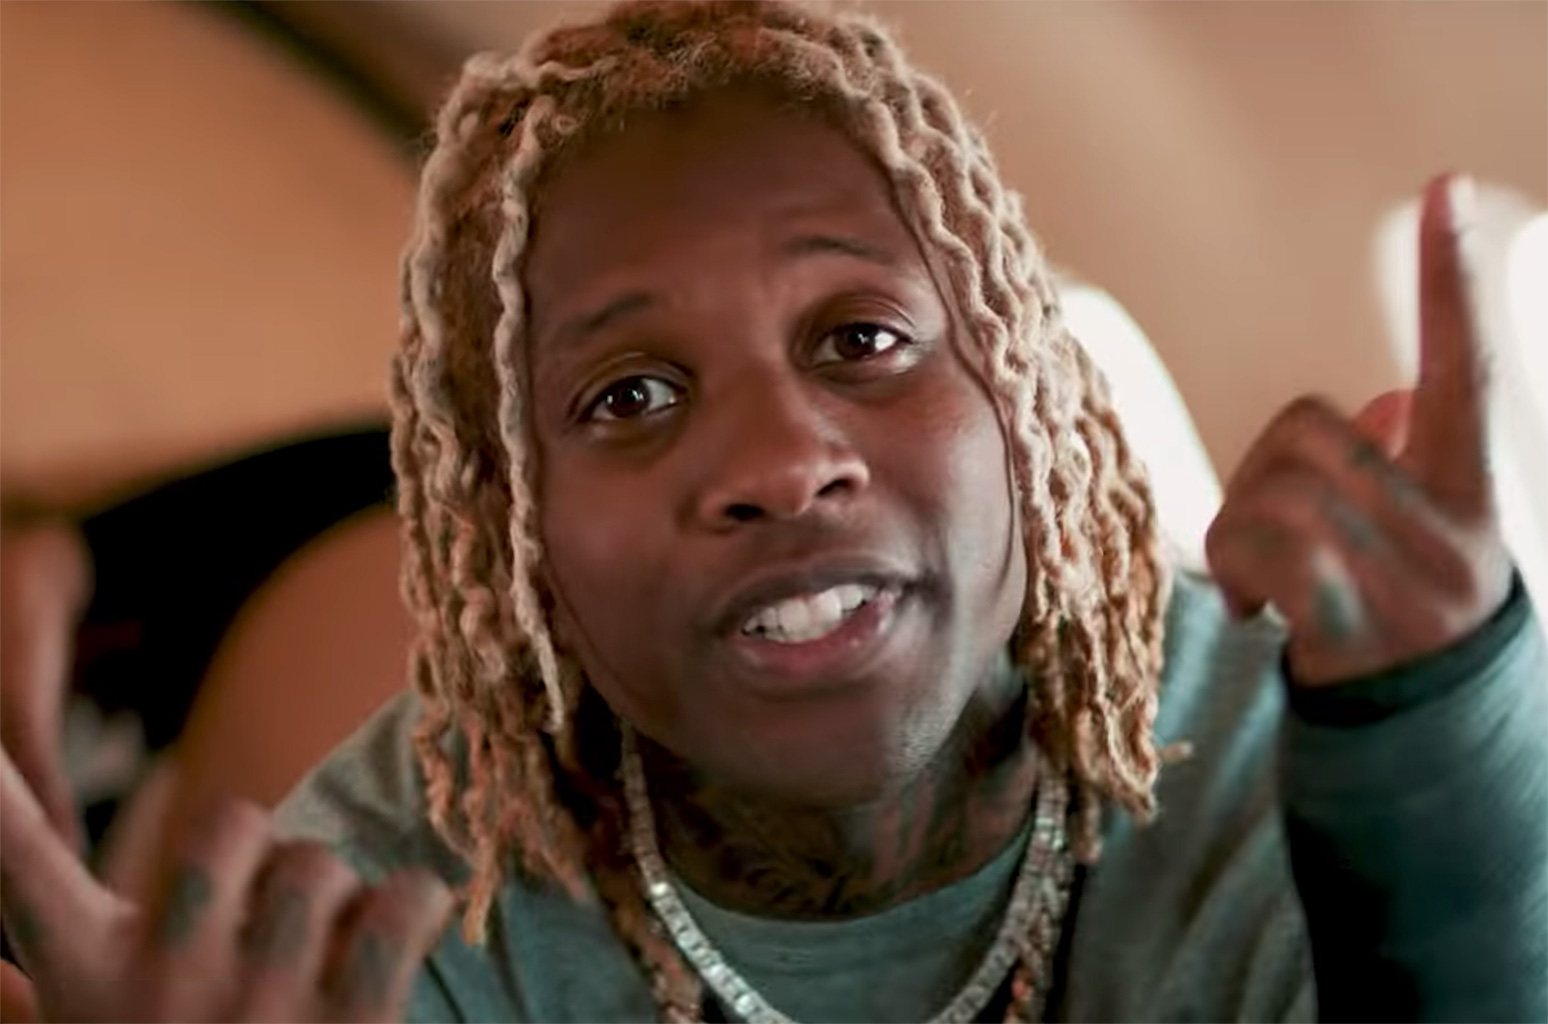 Durk in the visuals for one of his 2019 hit singles.